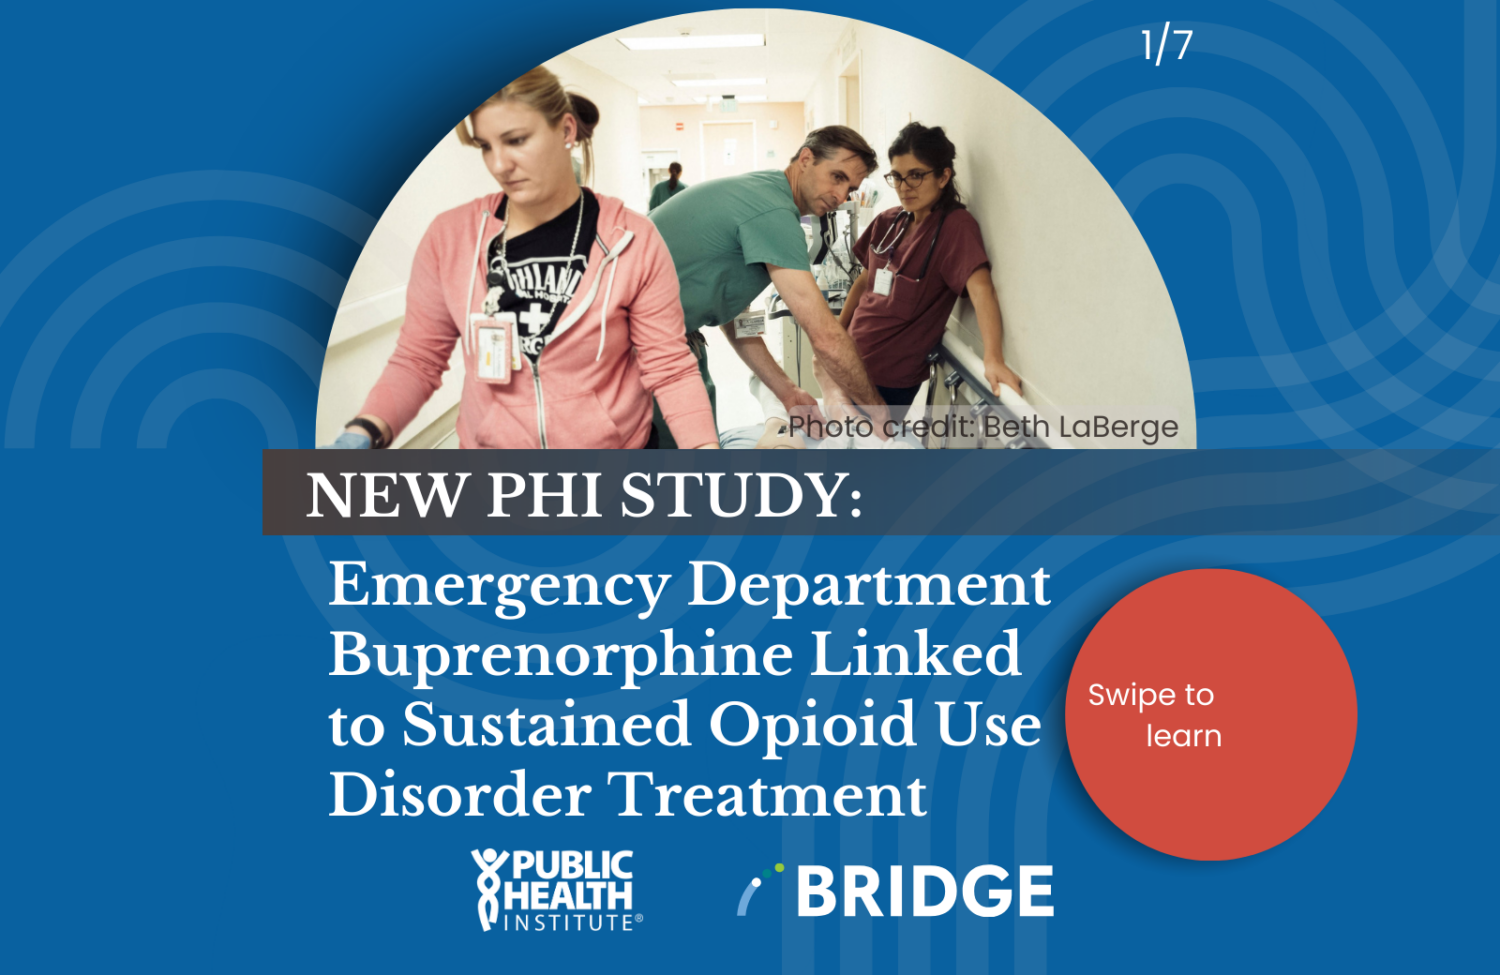 New Study: Emergency Department Buprenorphine Linked to Sustained Opioid Use Disorder Treatment. Logos of PHI and Bridge; image of medical staff and patients in an emergency room.